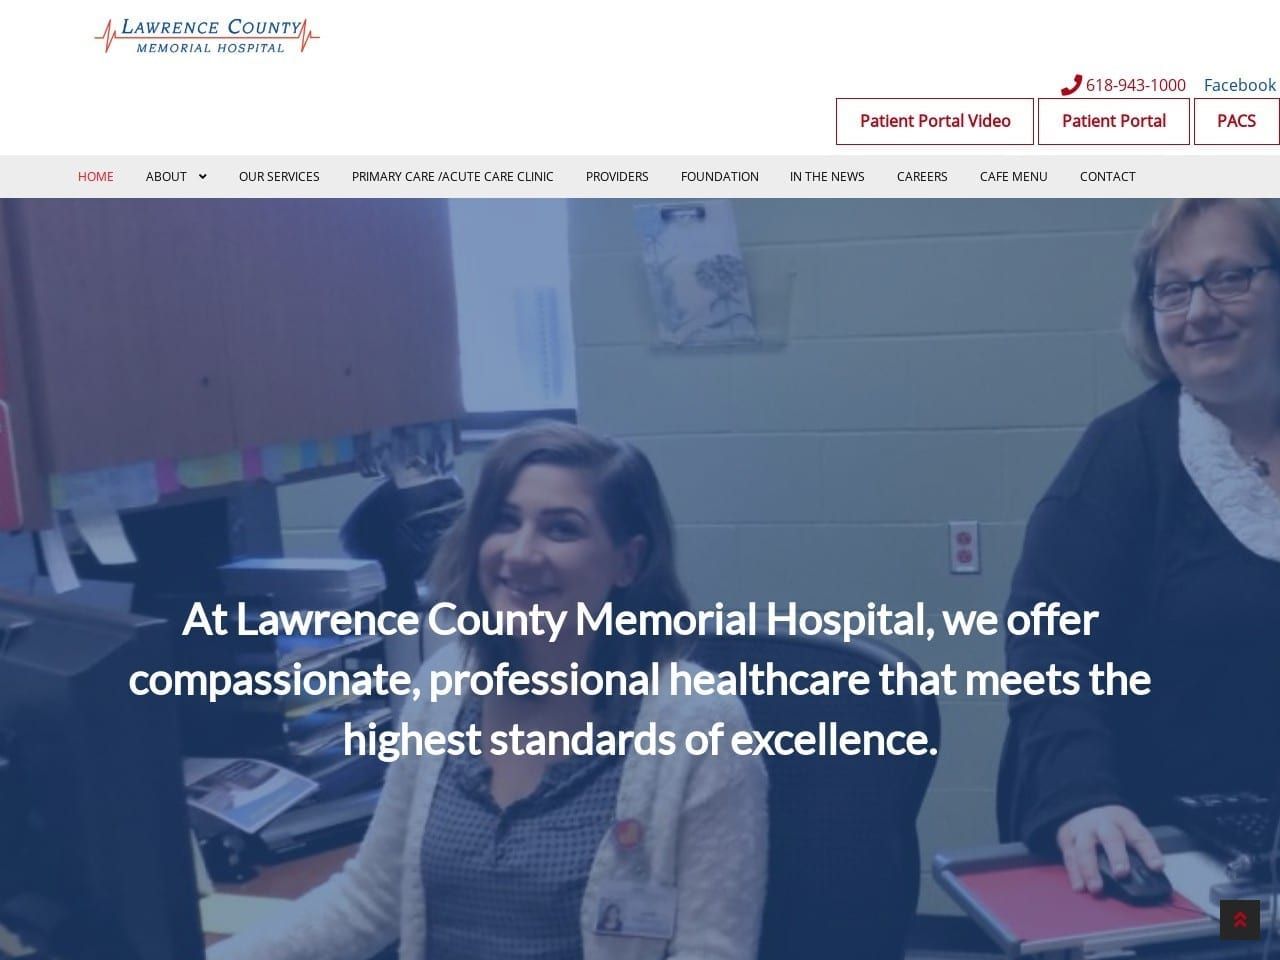 Lawrence County Memorial Hospital Website Screenshot from lcmhosp.org